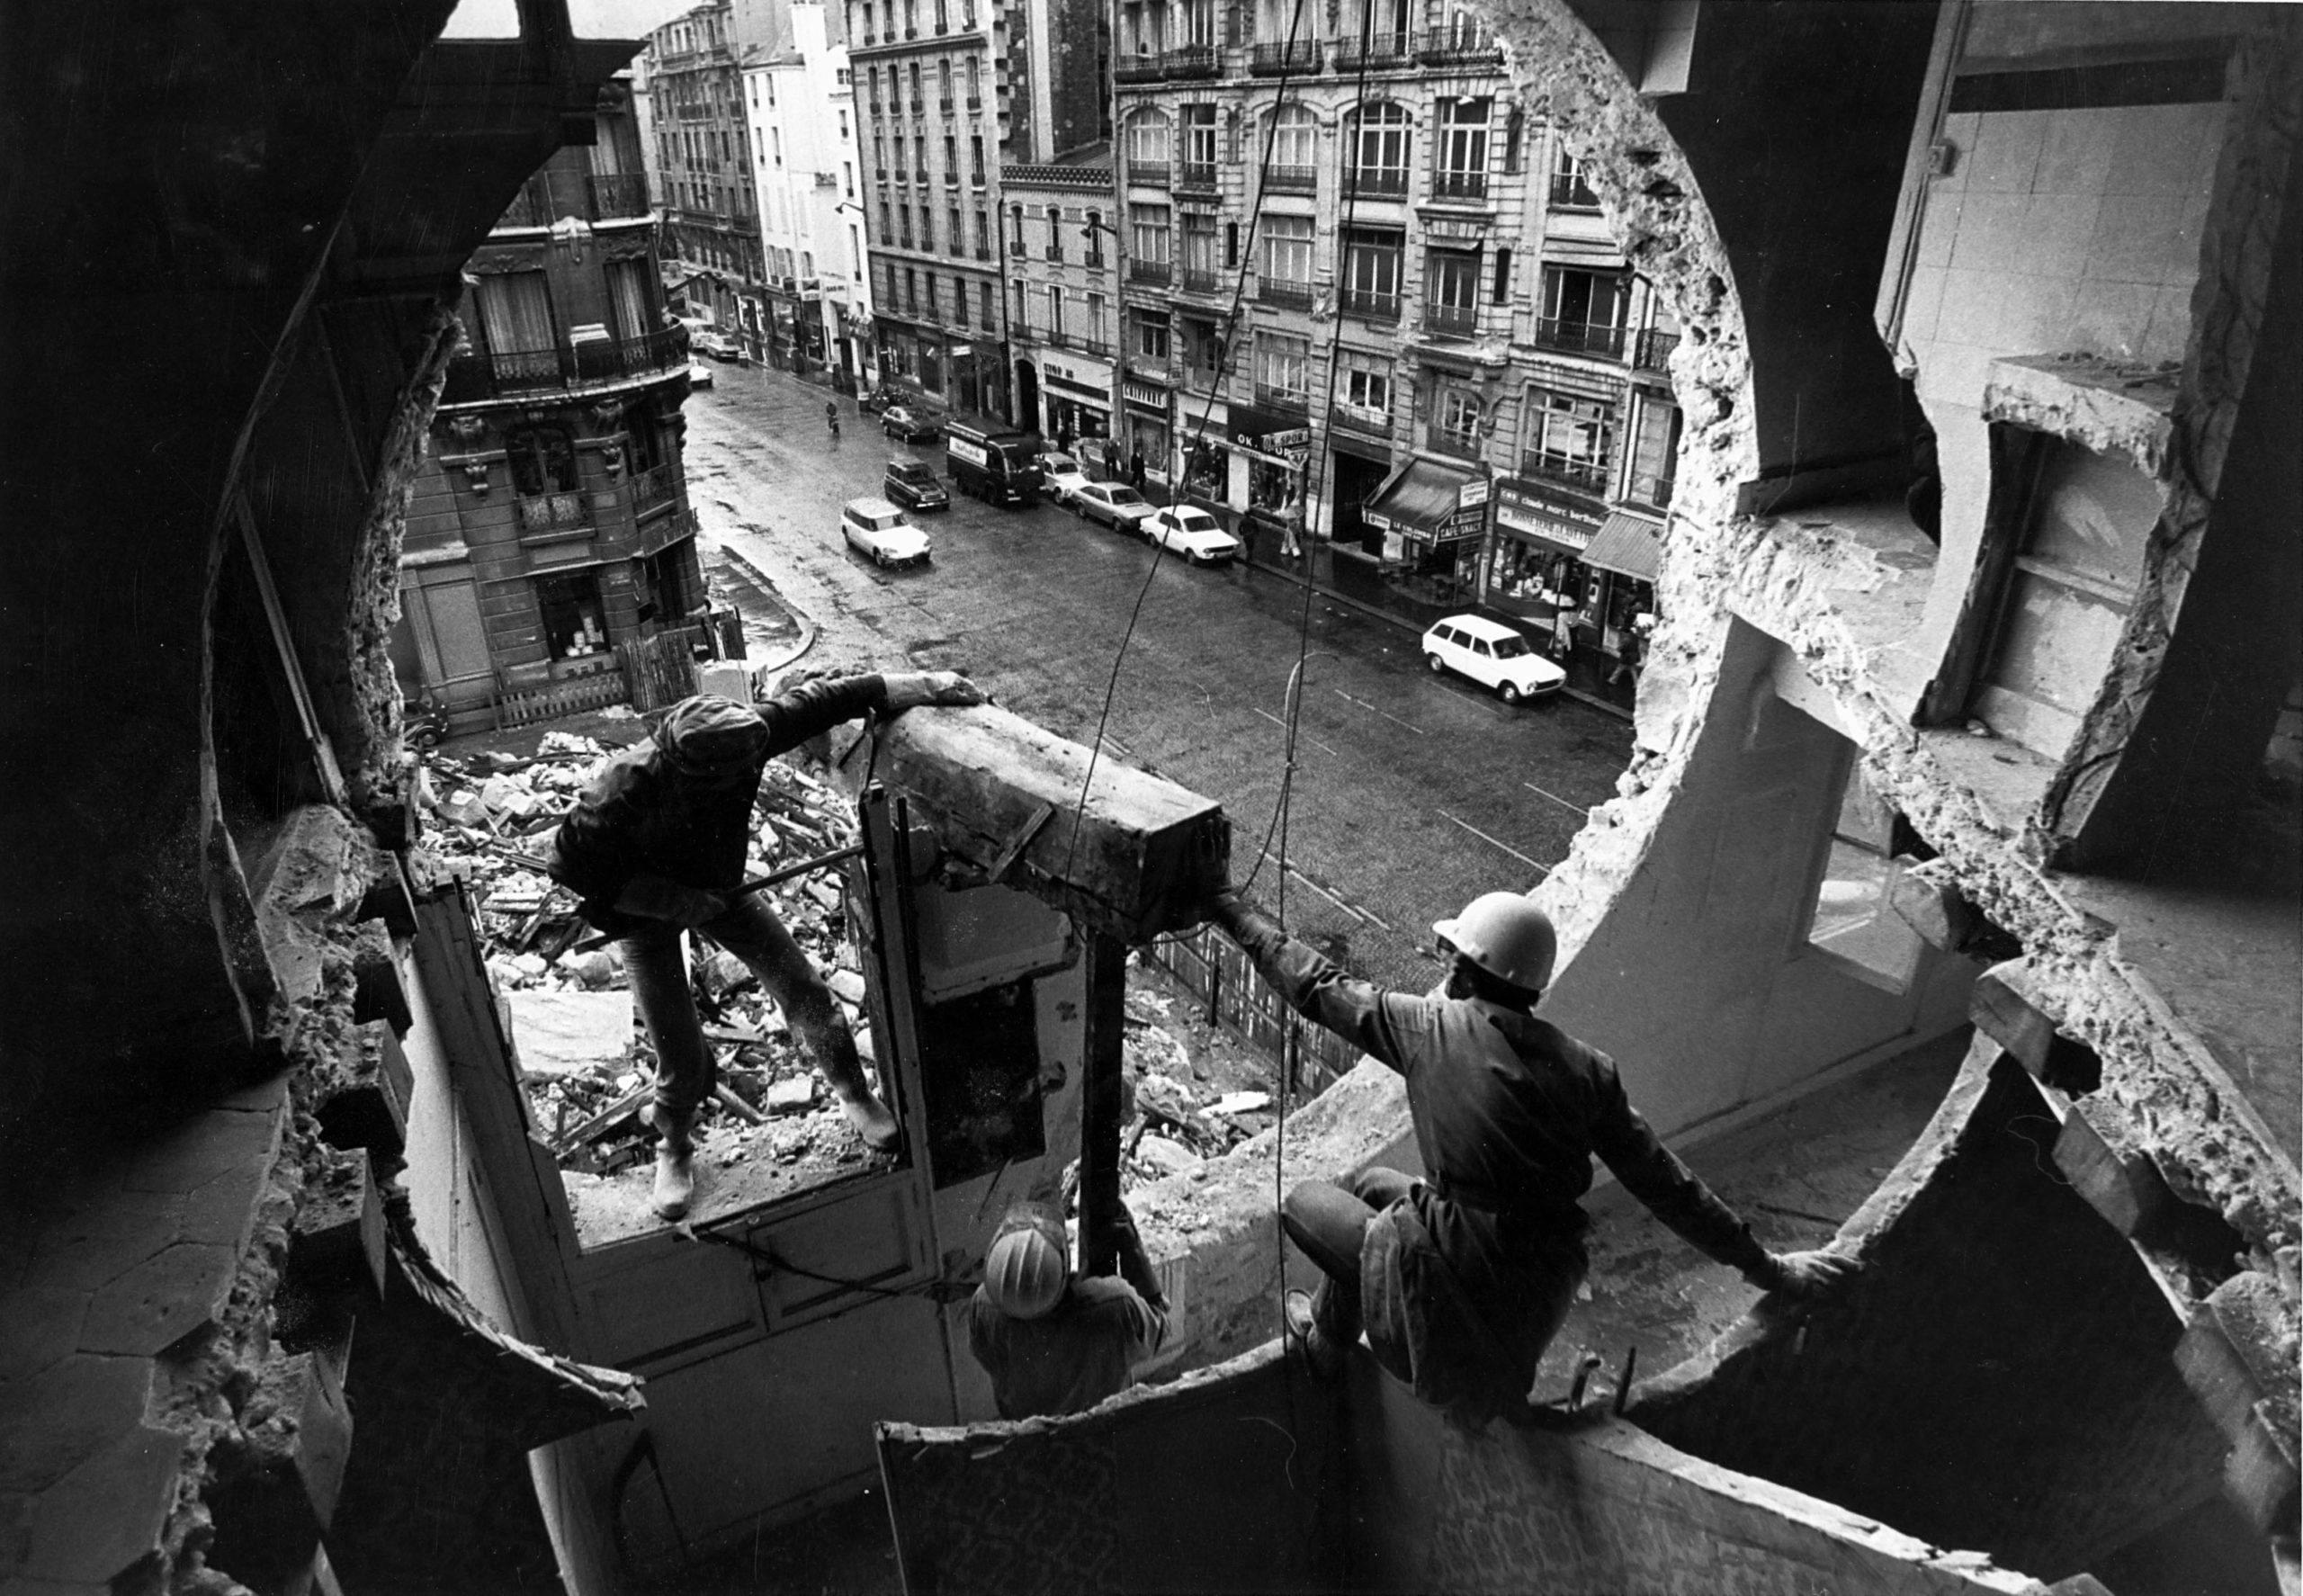 A photograph of Gordon Matta-Clark and Gerry Hovagimyan working on Conical Intersect, by Harry Gruyart, dated 1975.